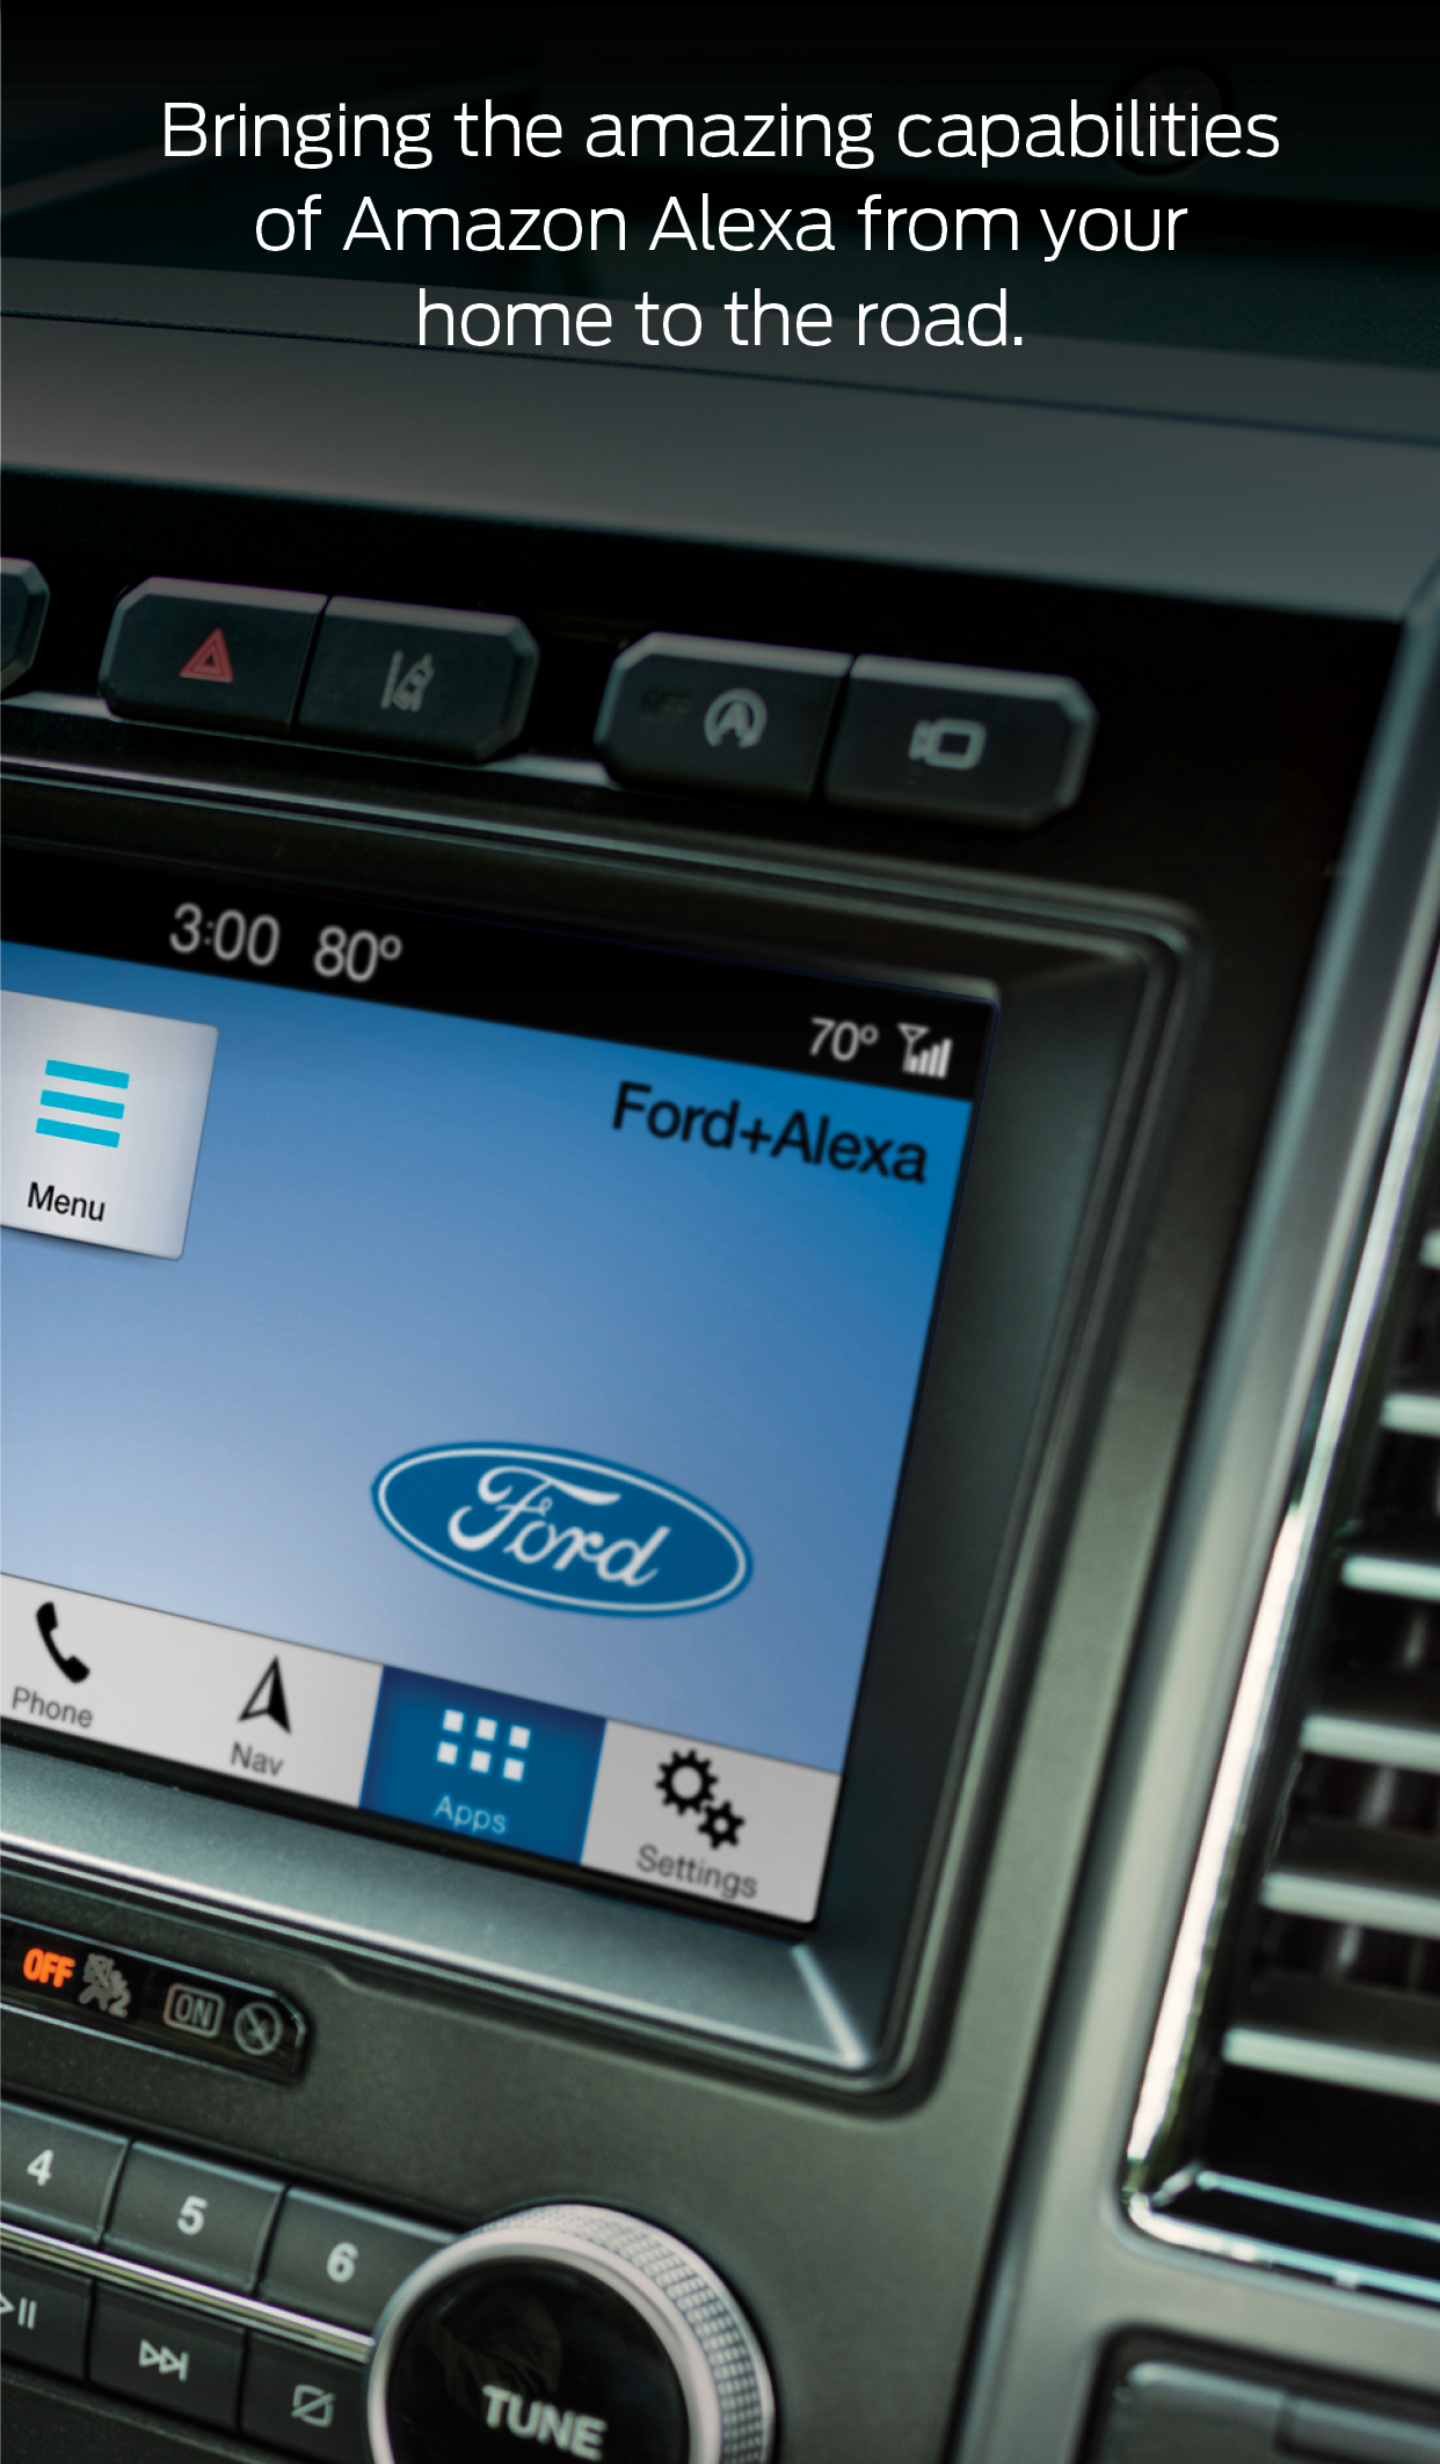 Ford+Alexa APK 1.0.21 for Android – Download Ford+Alexa APK Latest Version  from APKFab.com